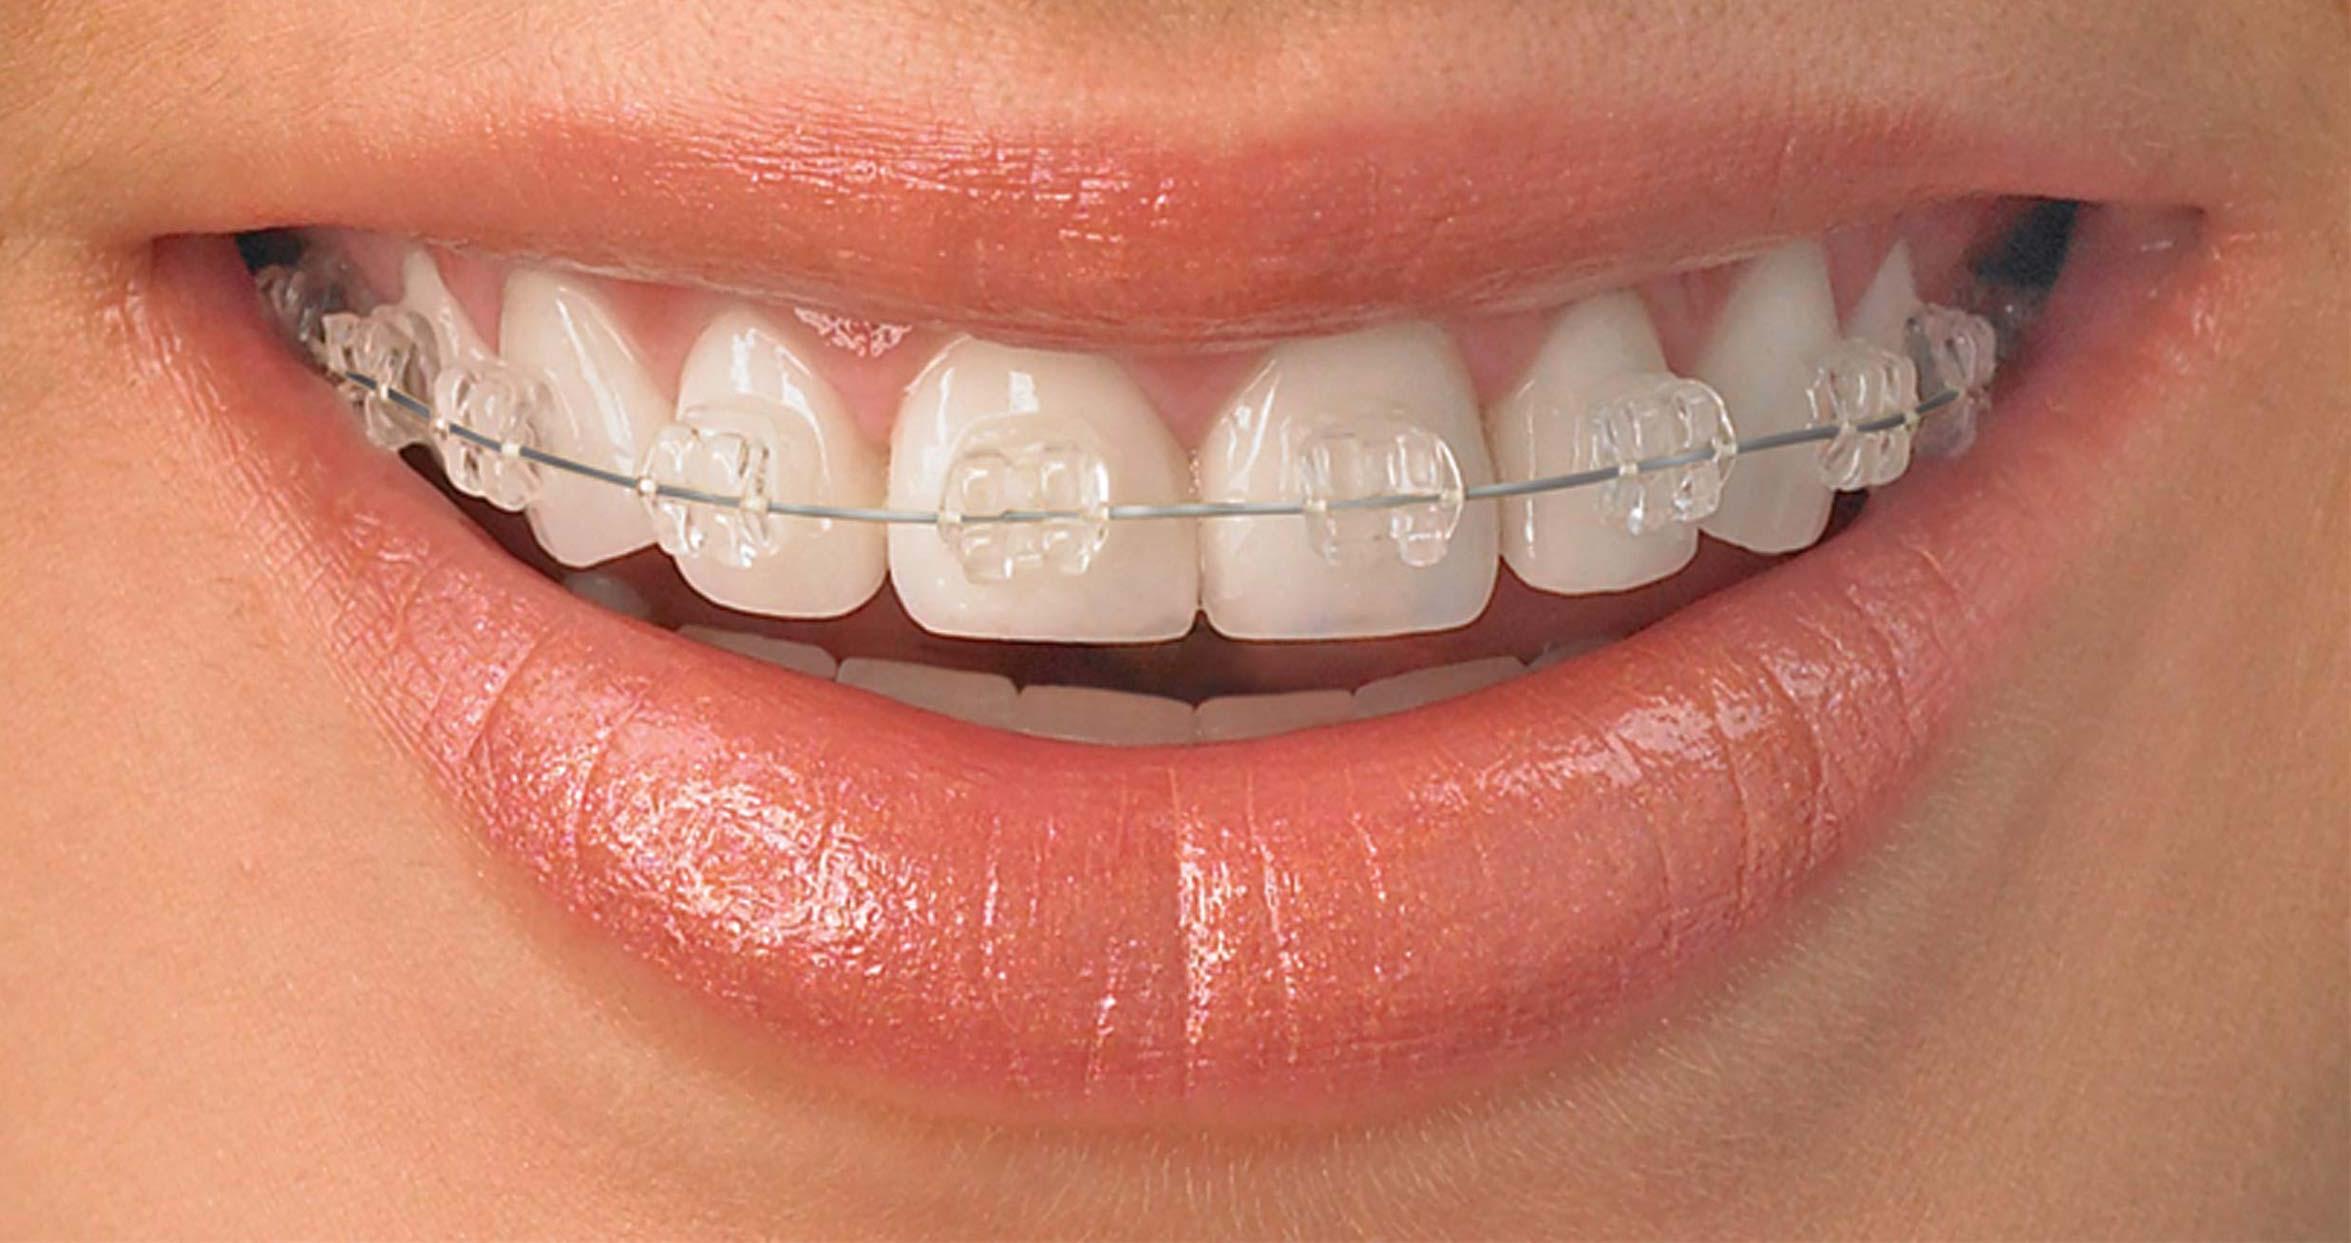 Advice from a Braces Dentist: How to Take Care of Braces